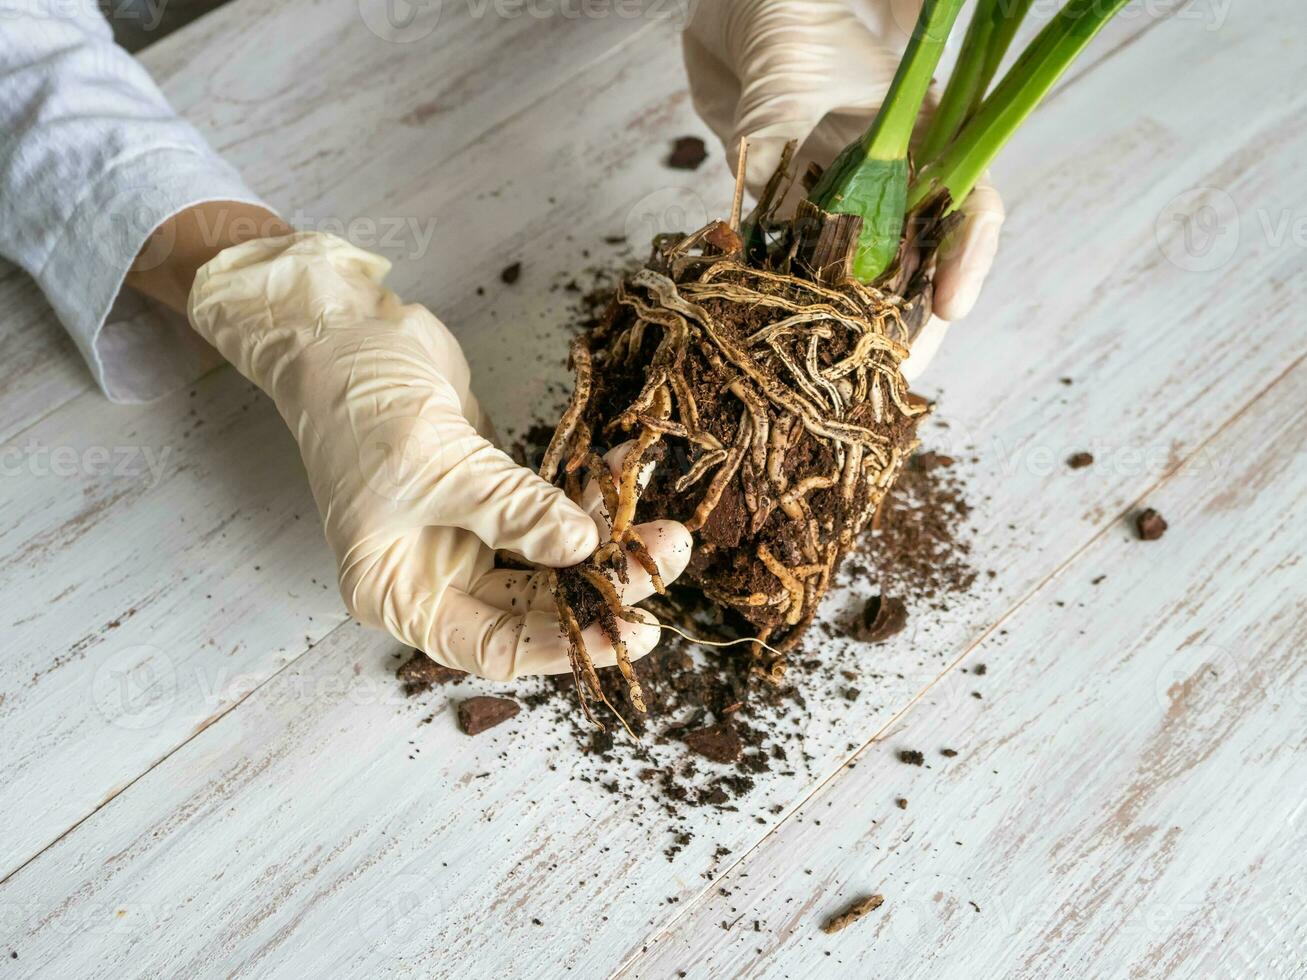 A gloved hand shows the damaged diseased orchid roots on the table. Close-up of the affected orchid roots. The plant needs to be transplanted. photo